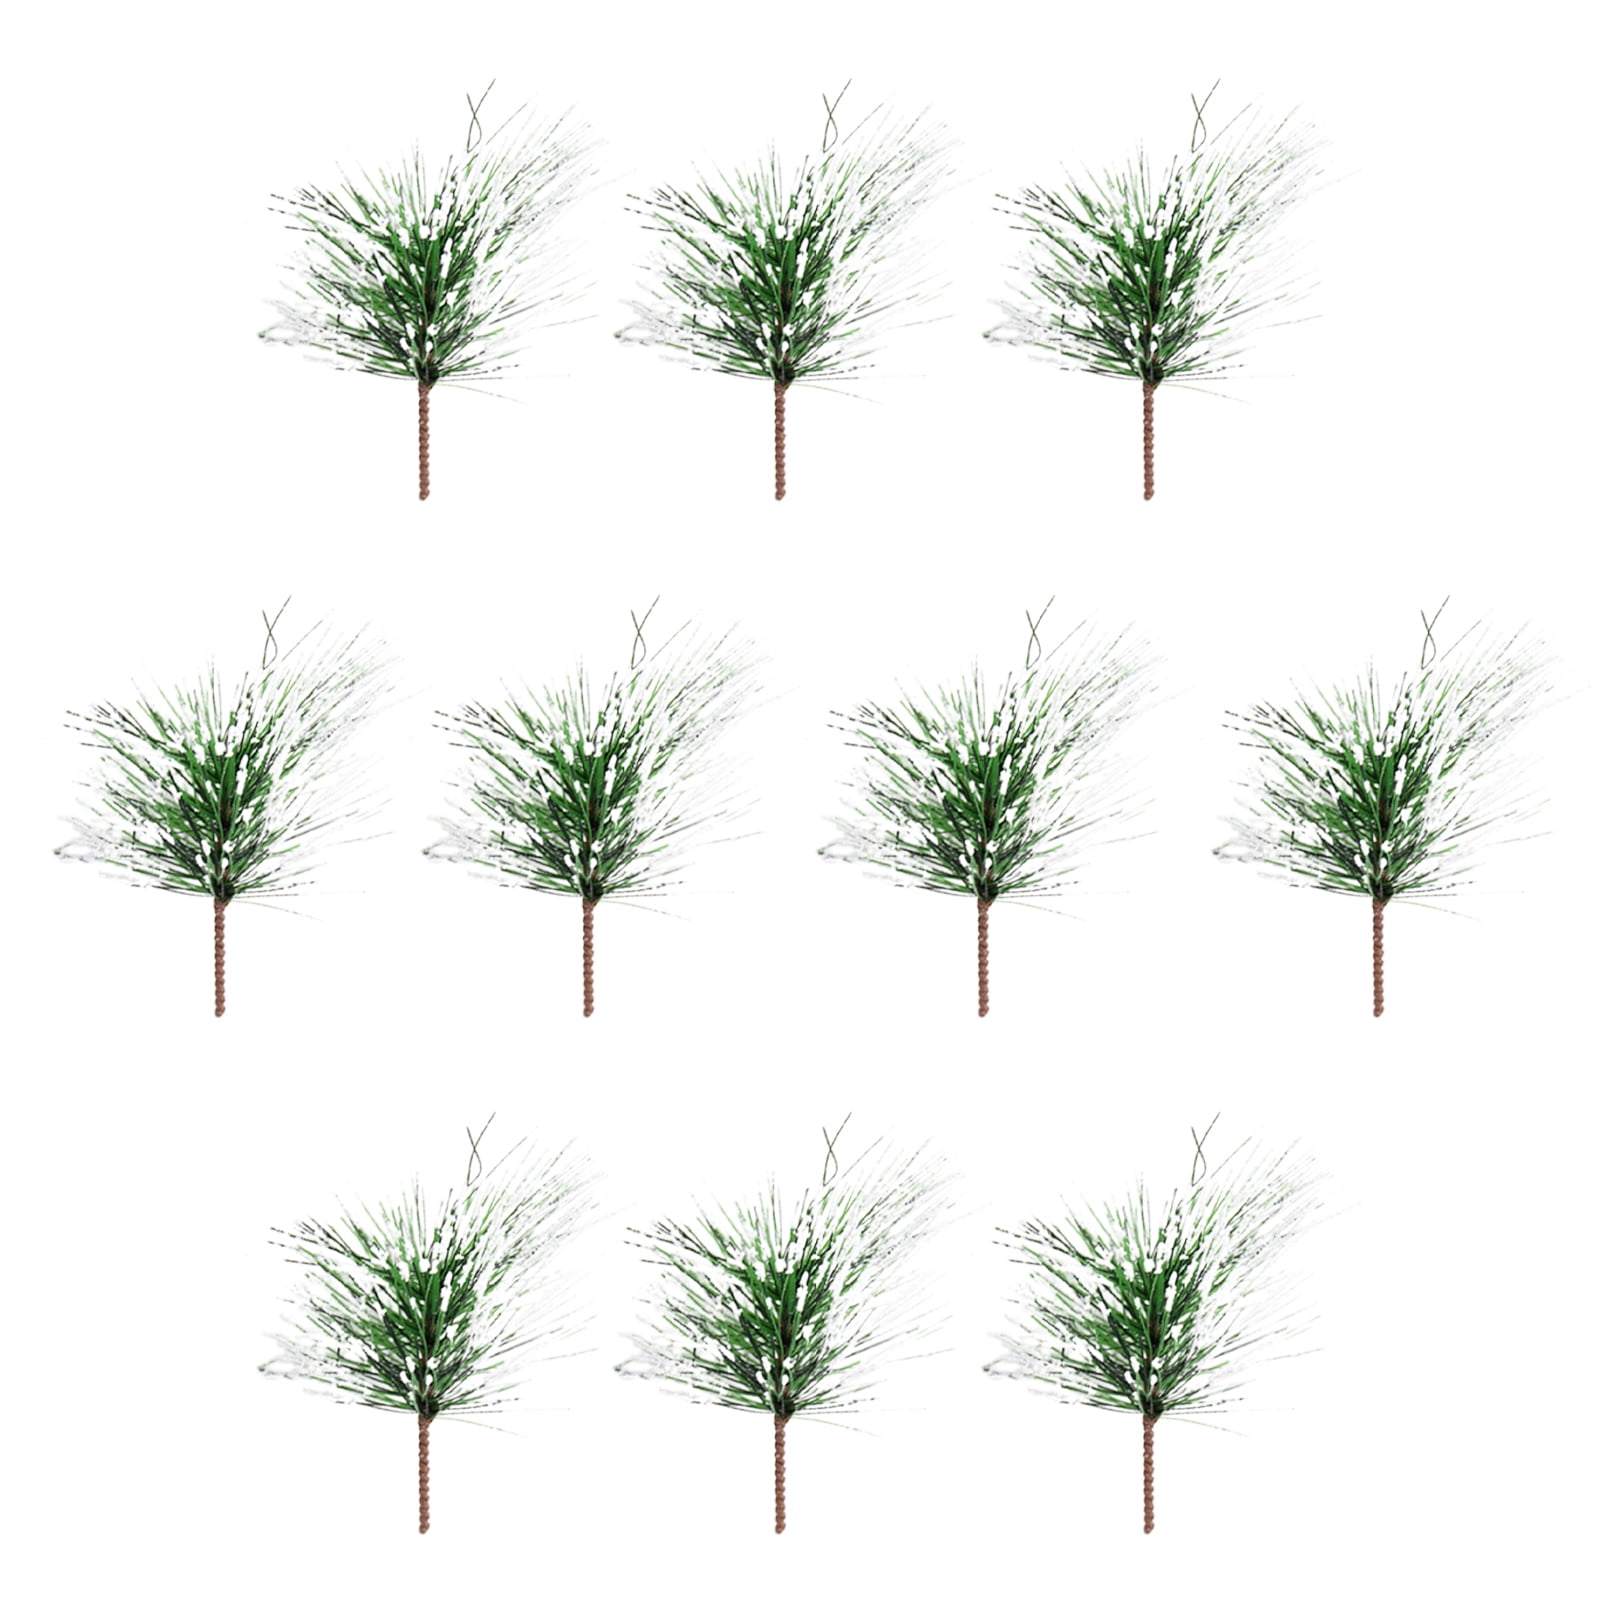 Details about   Christmas Artificial Snow Frost Pine Needles Branches Holiday Decor Fake Flower 